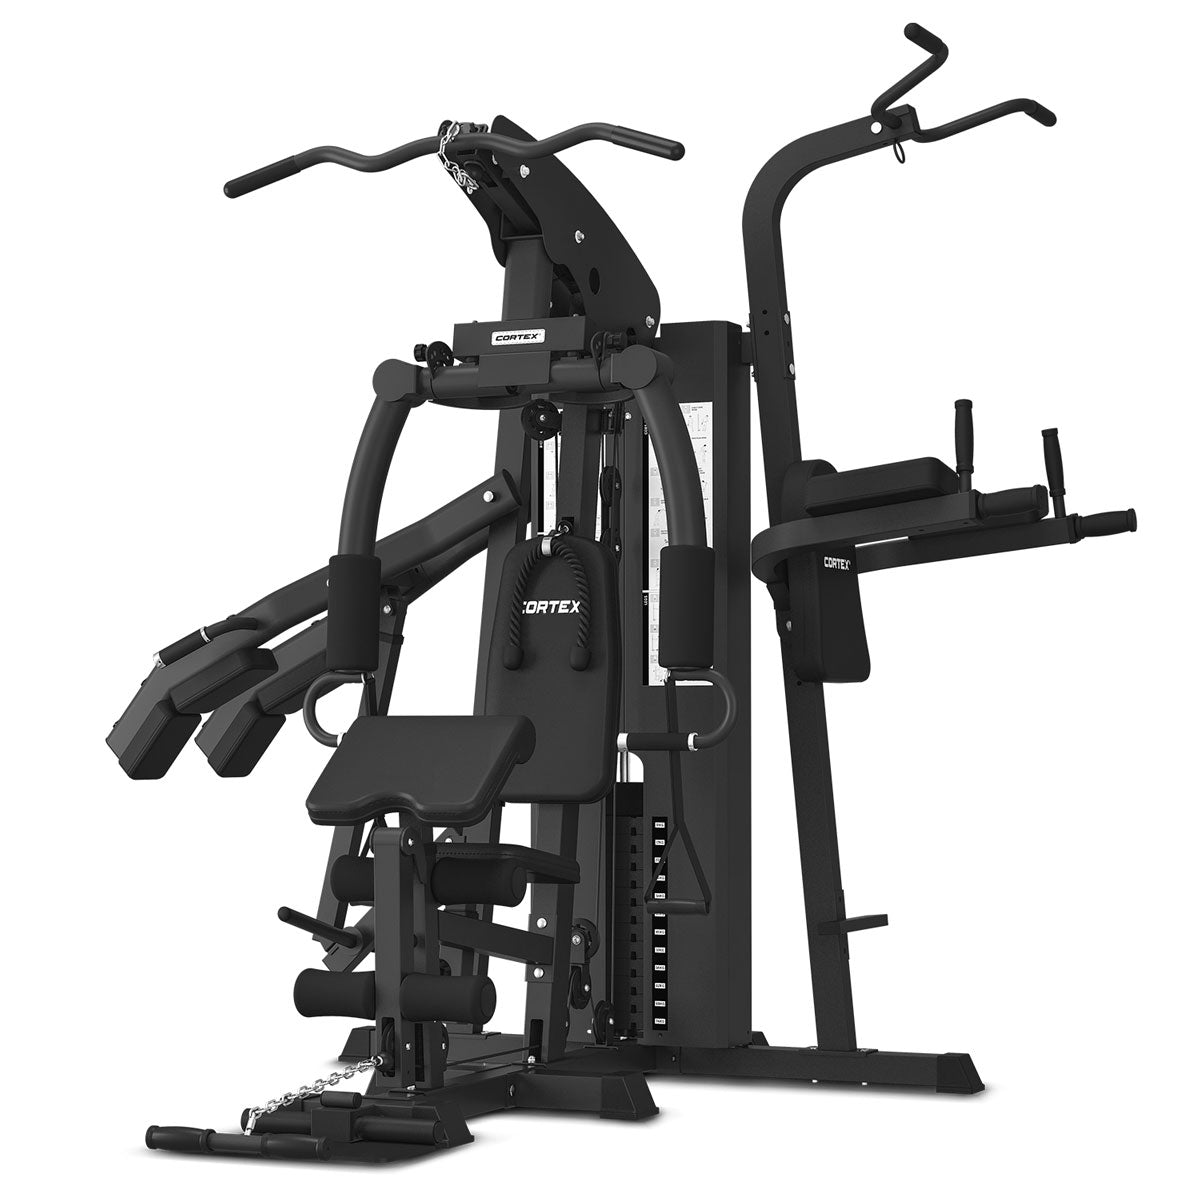 CORTEX GS7 Home Gym with Power Rack &amp; Squat Station + 98kg Weight Stack Package